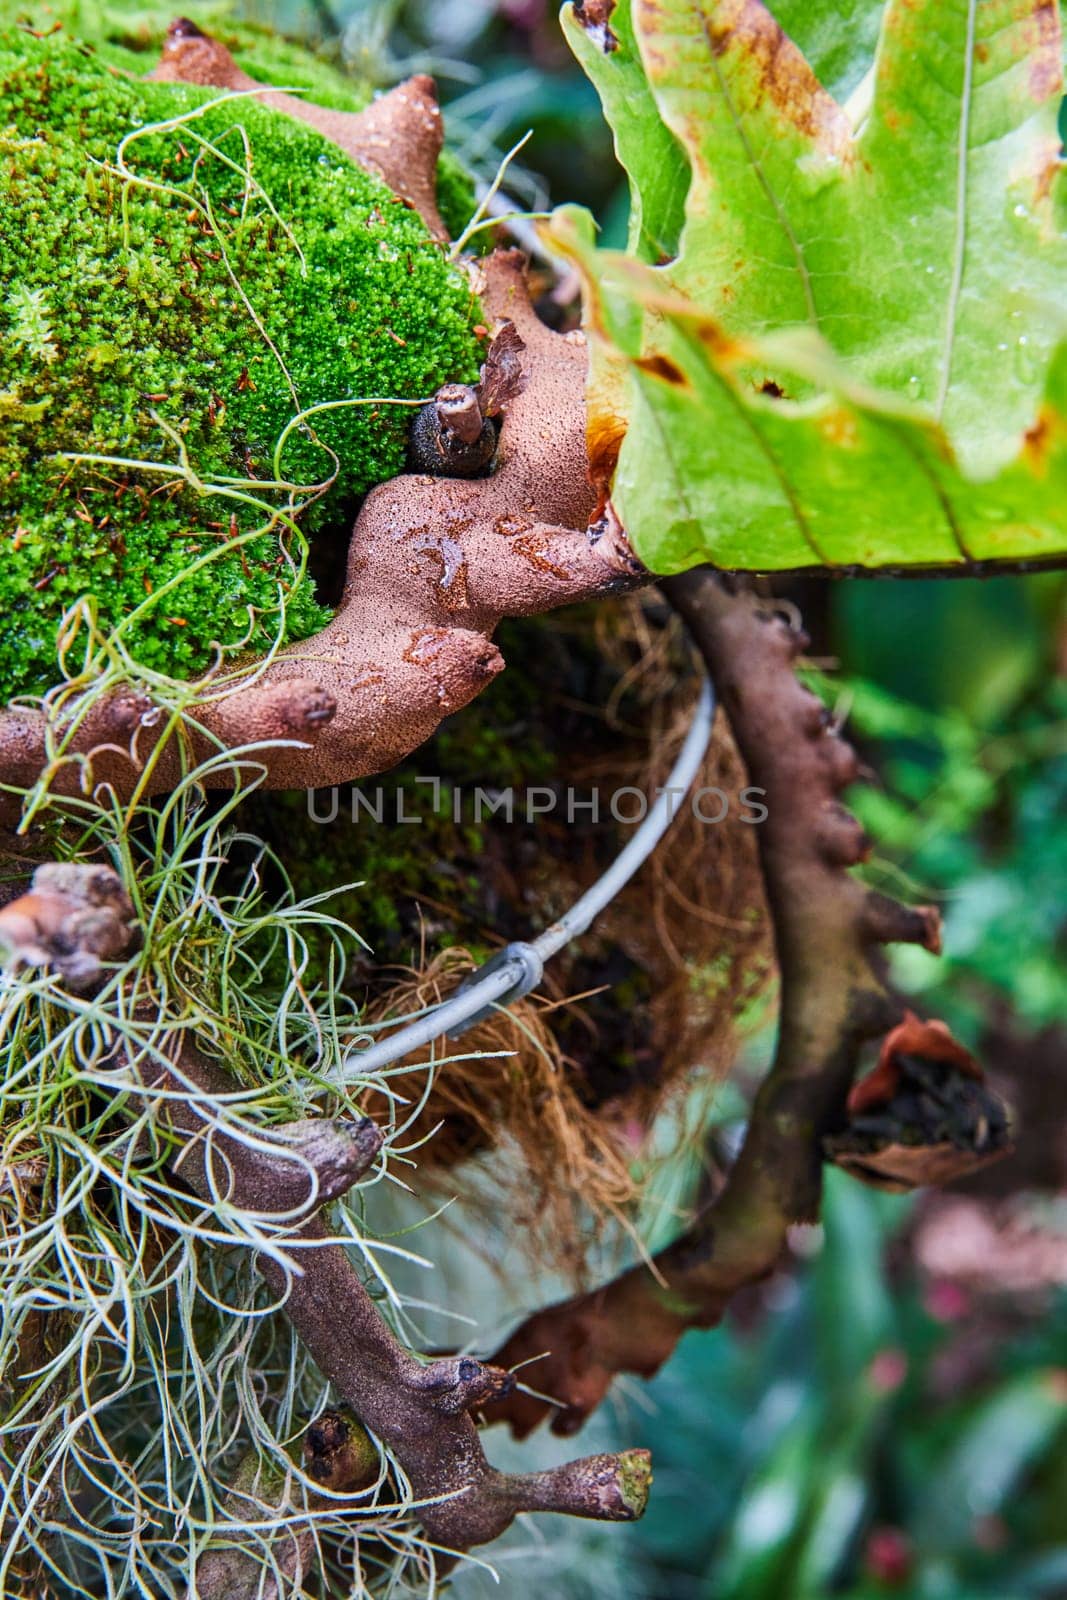 Lush Moss and Air Plants on Decaying Wood, Intimate Close-up by njproductions